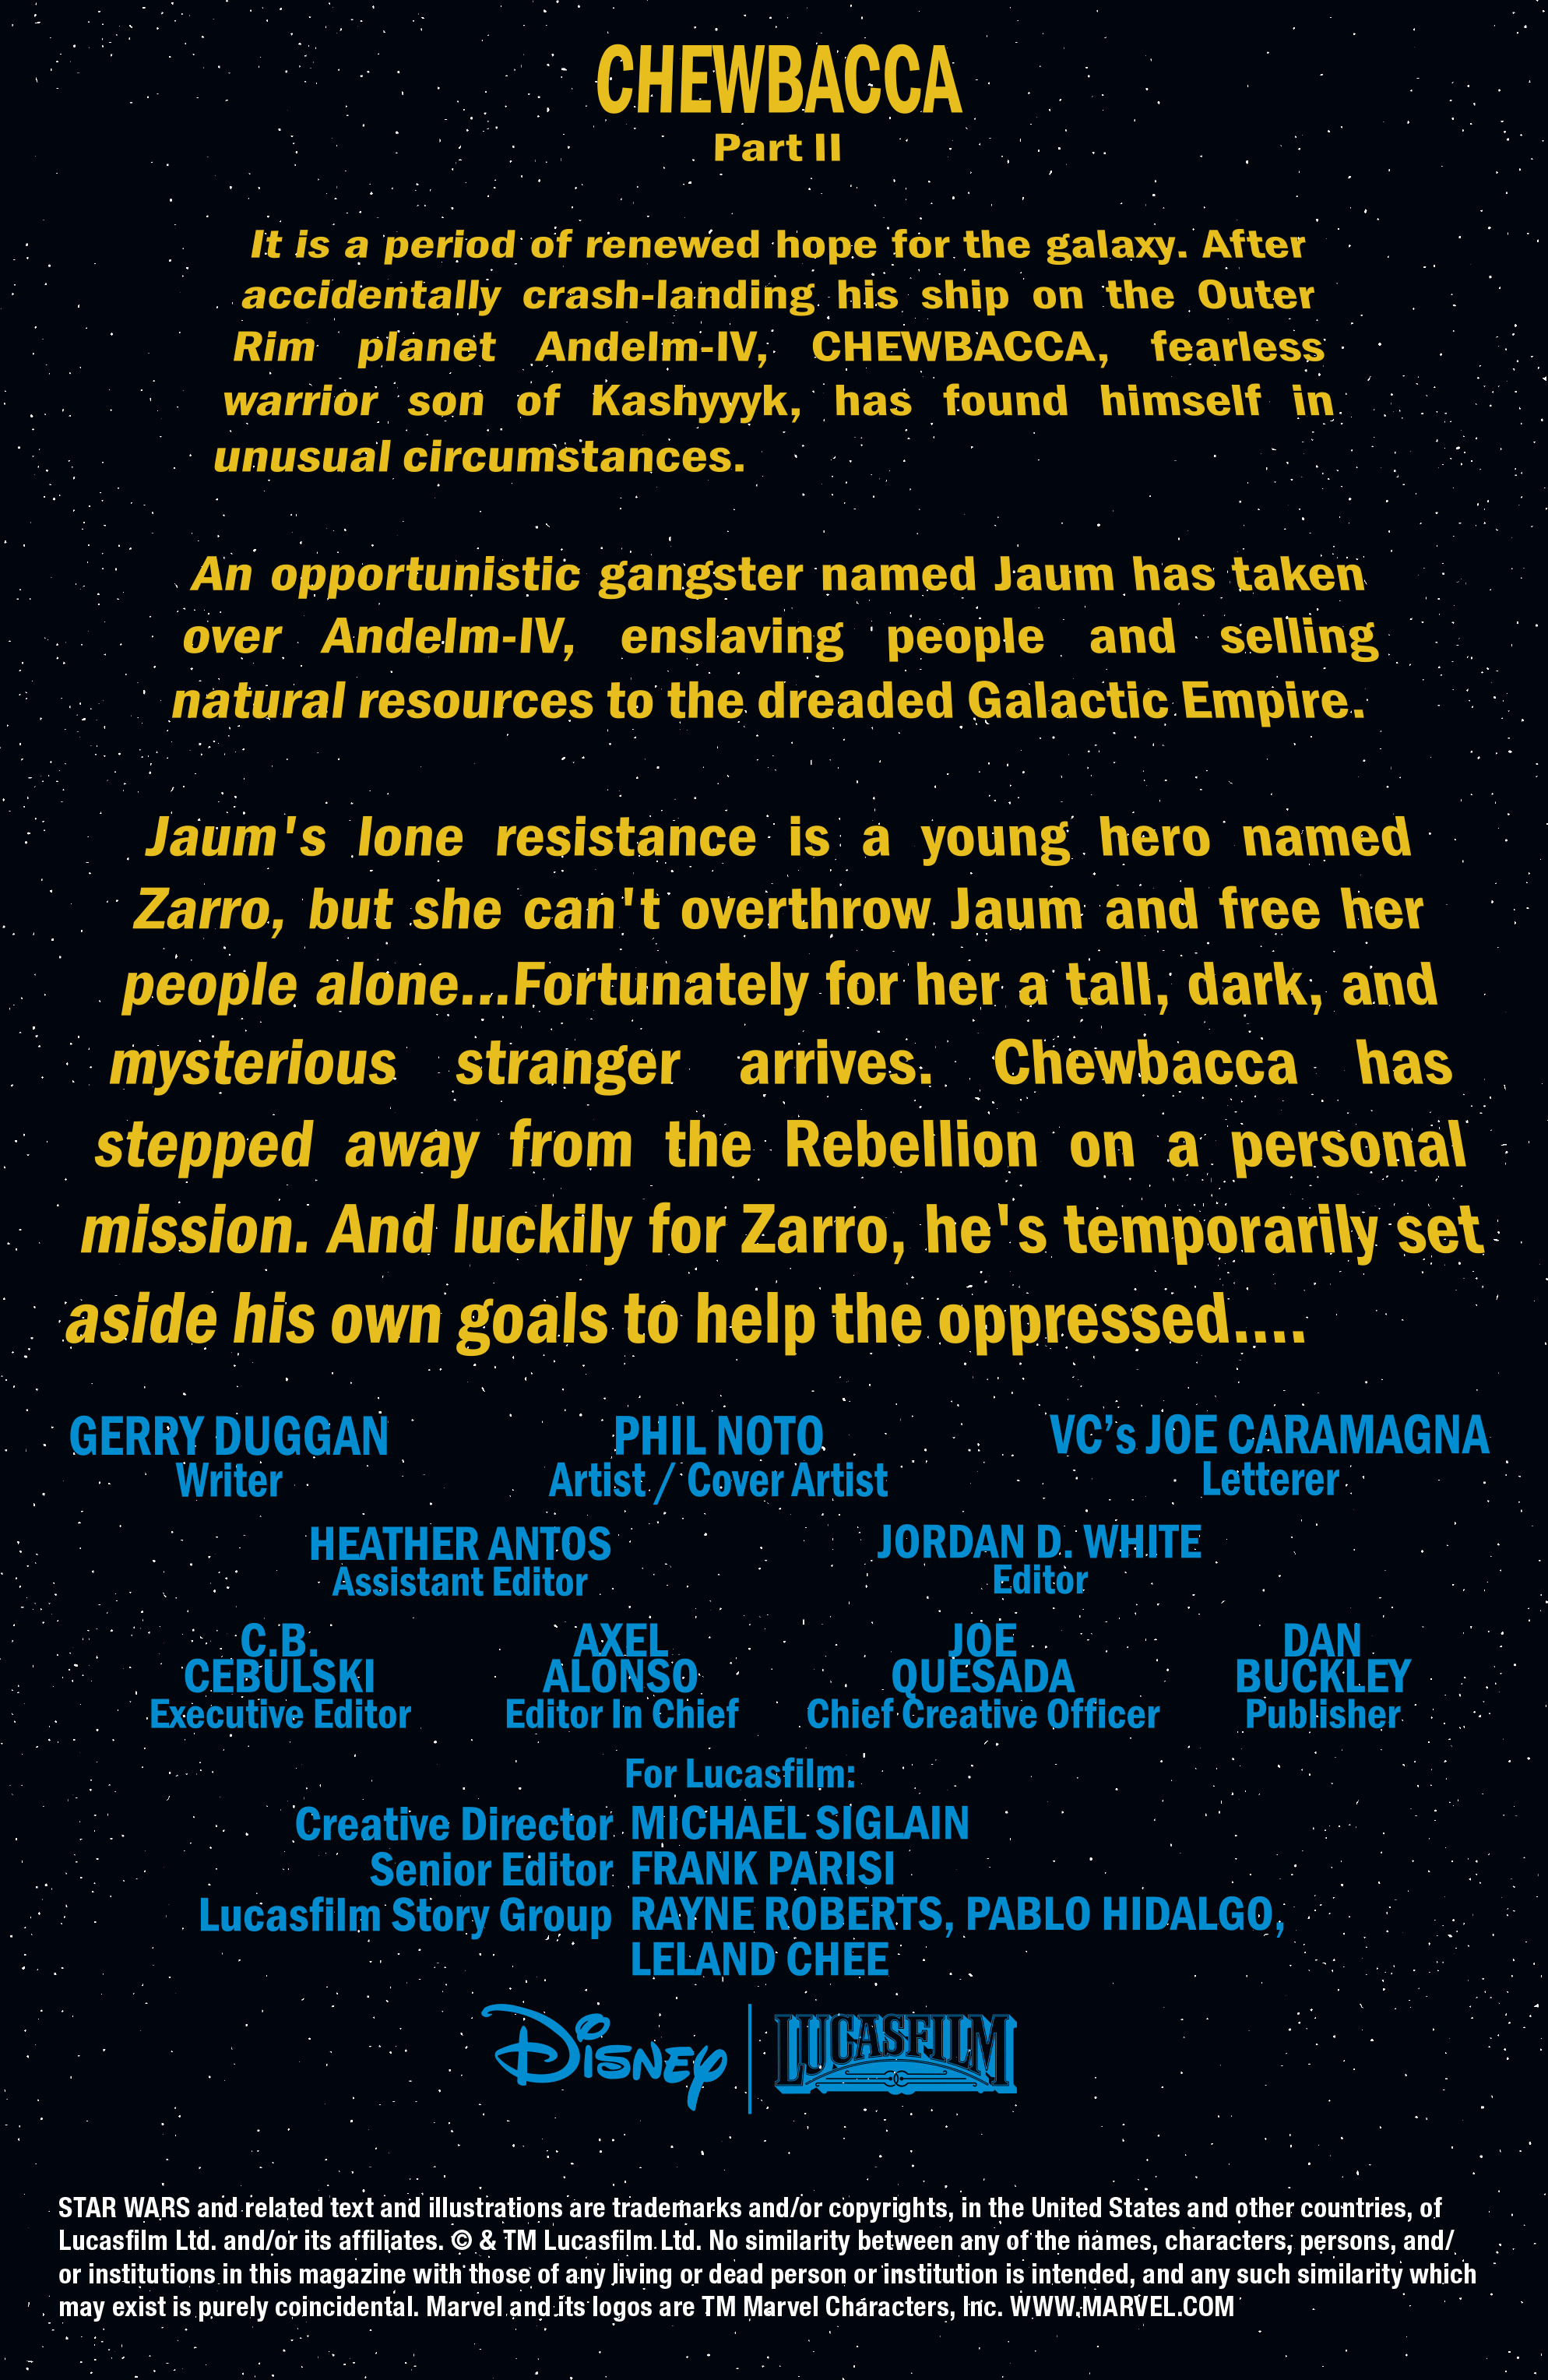 Read online Chewbacca comic -  Issue #2 - 2